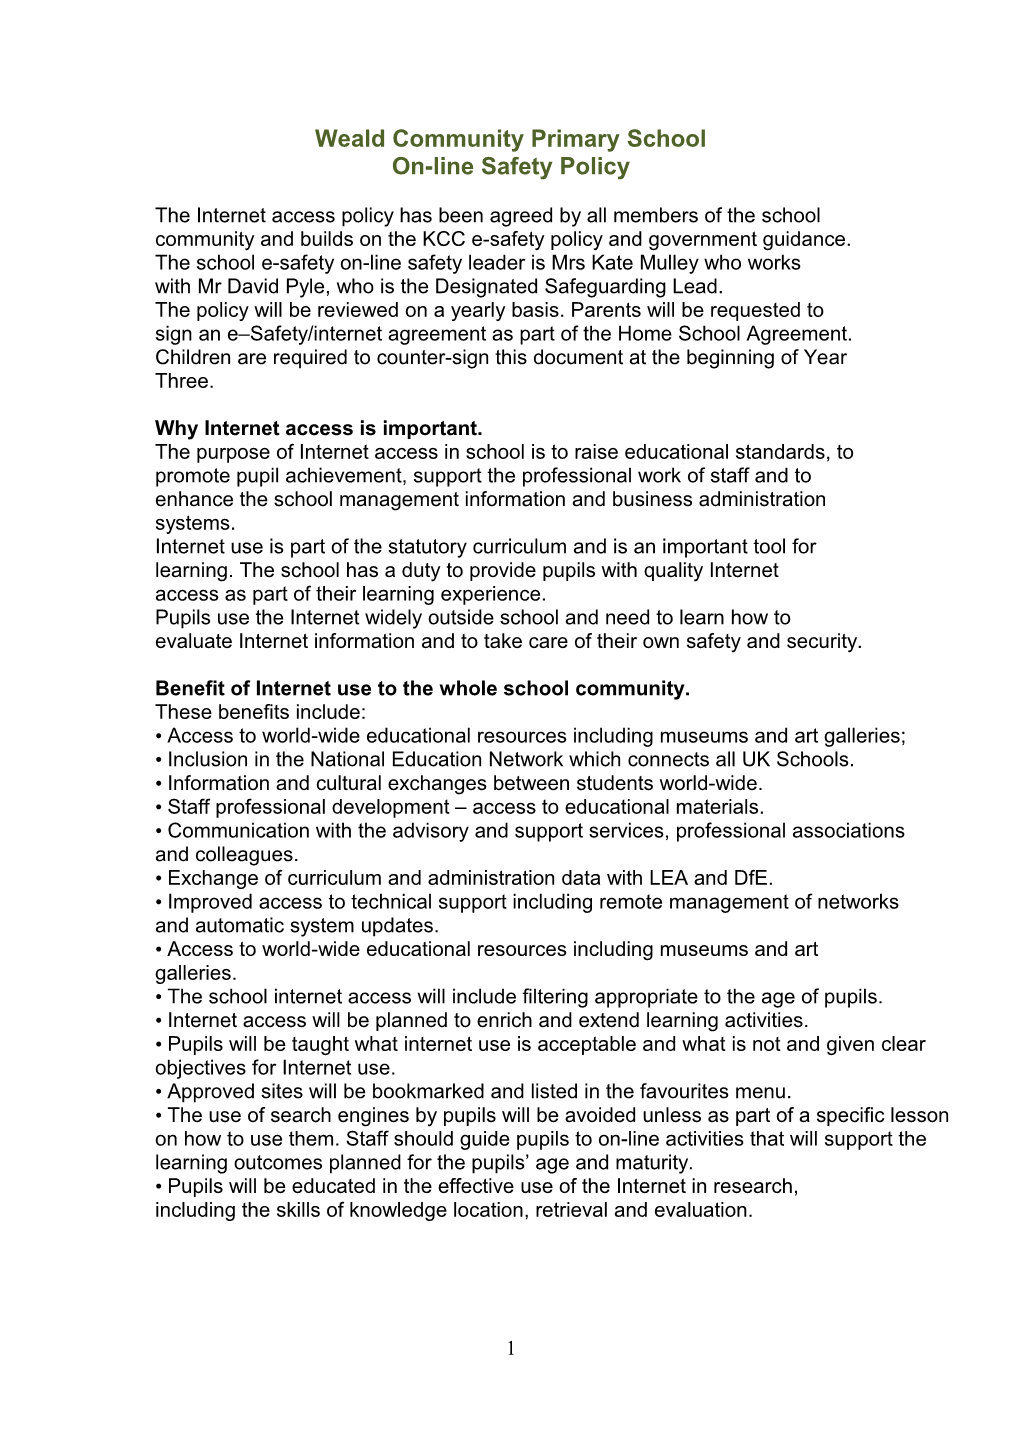 Weald Community Primary School: E-Safety Policy